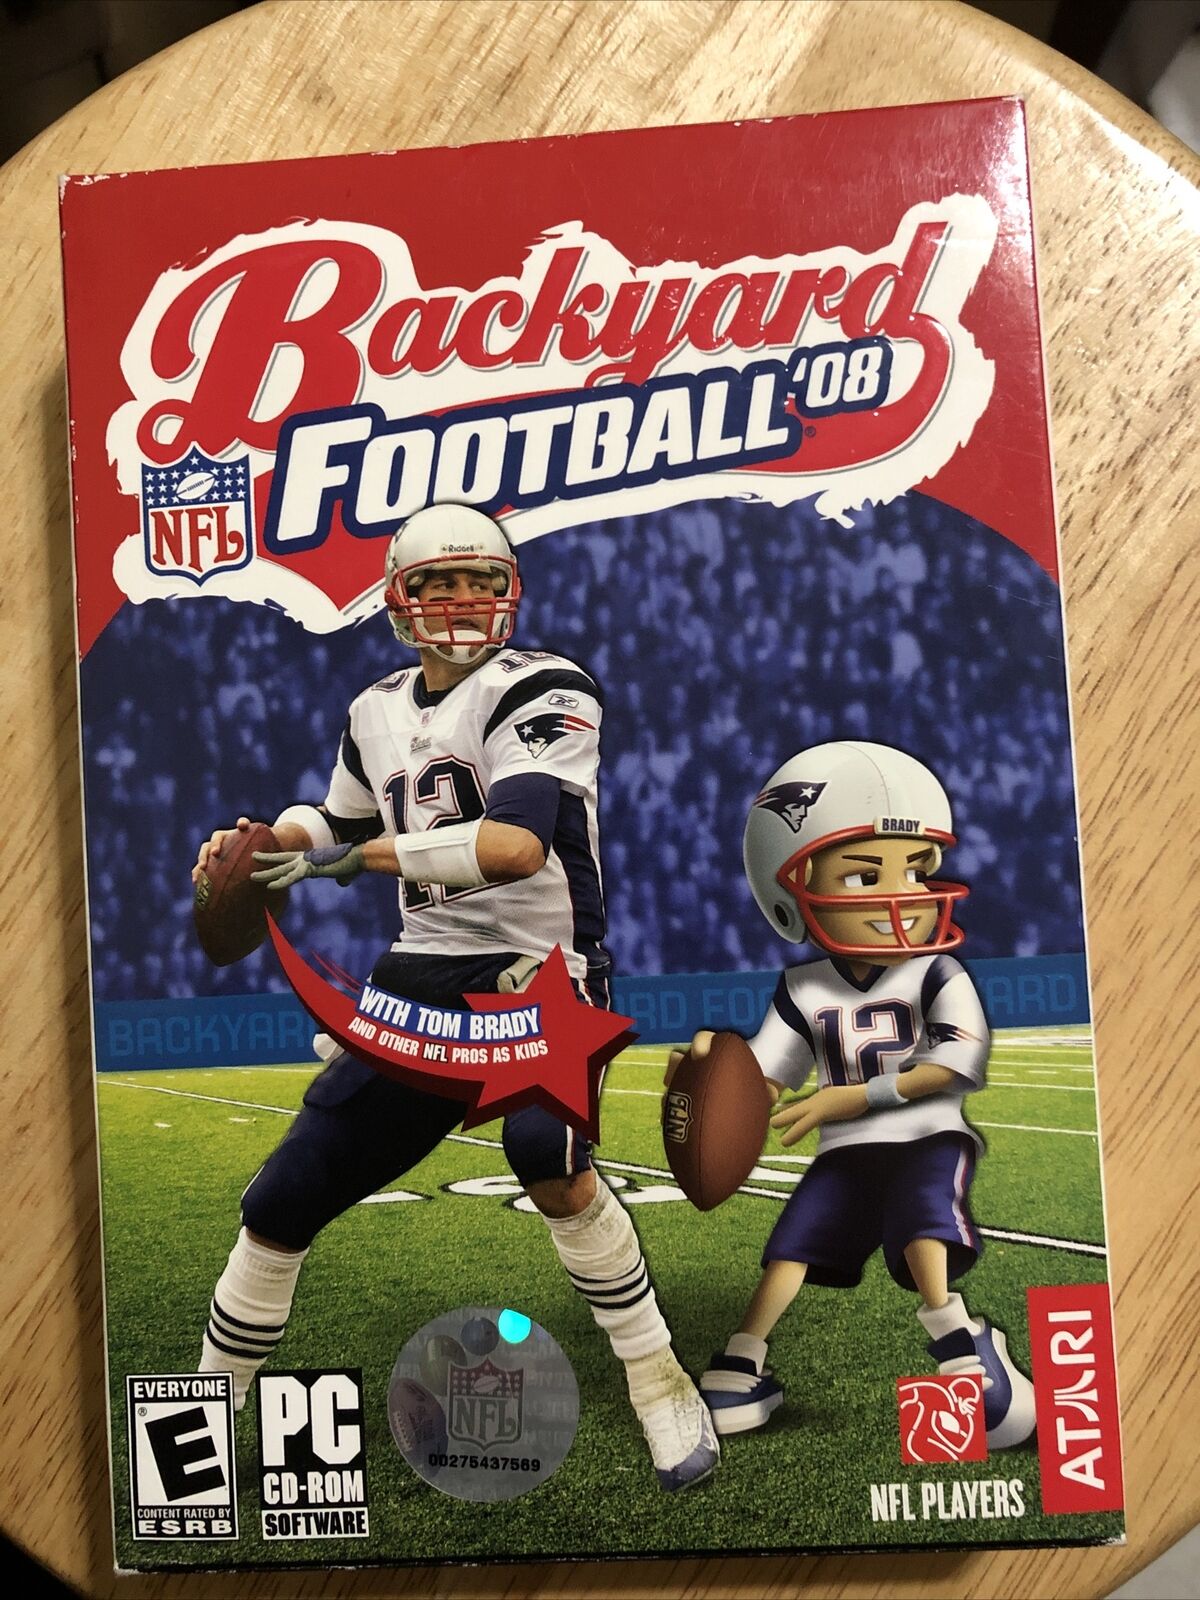 Backyard Football '08 (PC, 2007) New and Sealed in Box